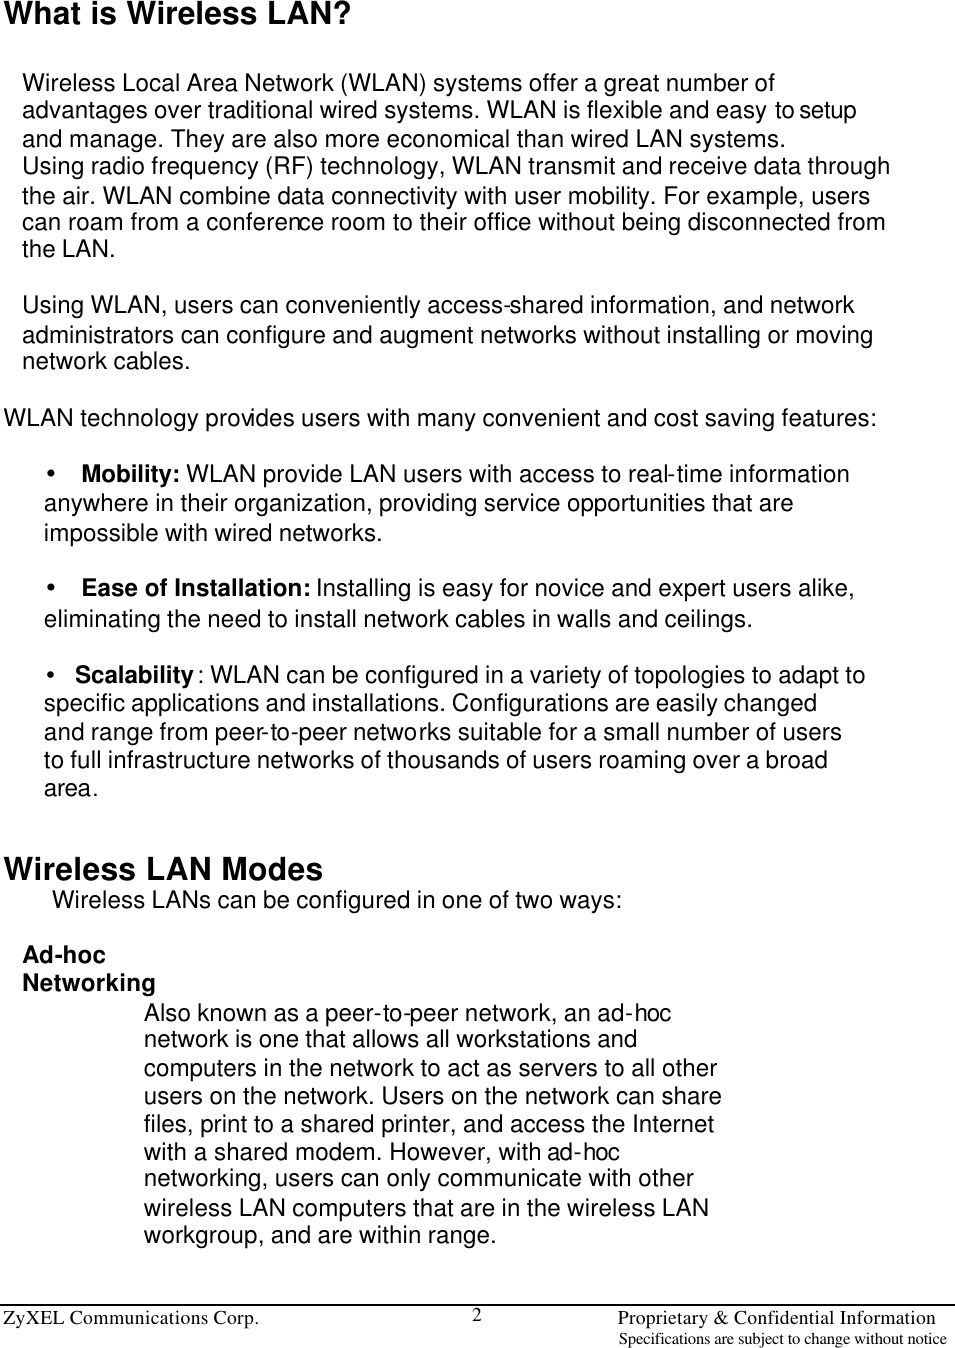  ZyXEL Communications Corp.                                                                       Proprietary &amp; Confidential Information                                                                                                                           Specifications are subject to change without notice 2  What is Wireless LAN?  Wireless Local Area Network (WLAN) systems offer a great number of advantages over traditional wired systems. WLAN is flexible and easy to setup and manage. They are also more economical than wired LAN systems. Using radio frequency (RF) technology, WLAN transmit and receive data through the air. WLAN combine data connectivity with user mobility. For example, users can roam from a conference room to their office without being disconnected from the LAN.  Using WLAN, users can conveniently access-shared information, and network administrators can configure and augment networks without installing or moving network cables.  WLAN technology provides users with many convenient and cost saving features:  • Mobility: WLAN provide LAN users with access to real-time information anywhere in their organization, providing service opportunities that are impossible with wired networks.  • Ease of Installation: Installing is easy for novice and expert users alike, eliminating the need to install network cables in walls and ceilings.  • Scalability: WLAN can be configured in a variety of topologies to adapt to specific applications and installations. Configurations are easily changed and range from peer-to-peer networks suitable for a small number of users to full infrastructure networks of thousands of users roaming over a broad area.   Wireless LAN Modes Wireless LANs can be configured in one of two ways:  Ad-hoc Networking Also known as a peer-to-peer network, an ad-hoc network is one that allows all workstations and computers in the network to act as servers to all other users on the network. Users on the network can share files, print to a shared printer, and access the Internet with a shared modem. However, with ad-hoc networking, users can only communicate with other wireless LAN computers that are in the wireless LAN workgroup, and are within range.  